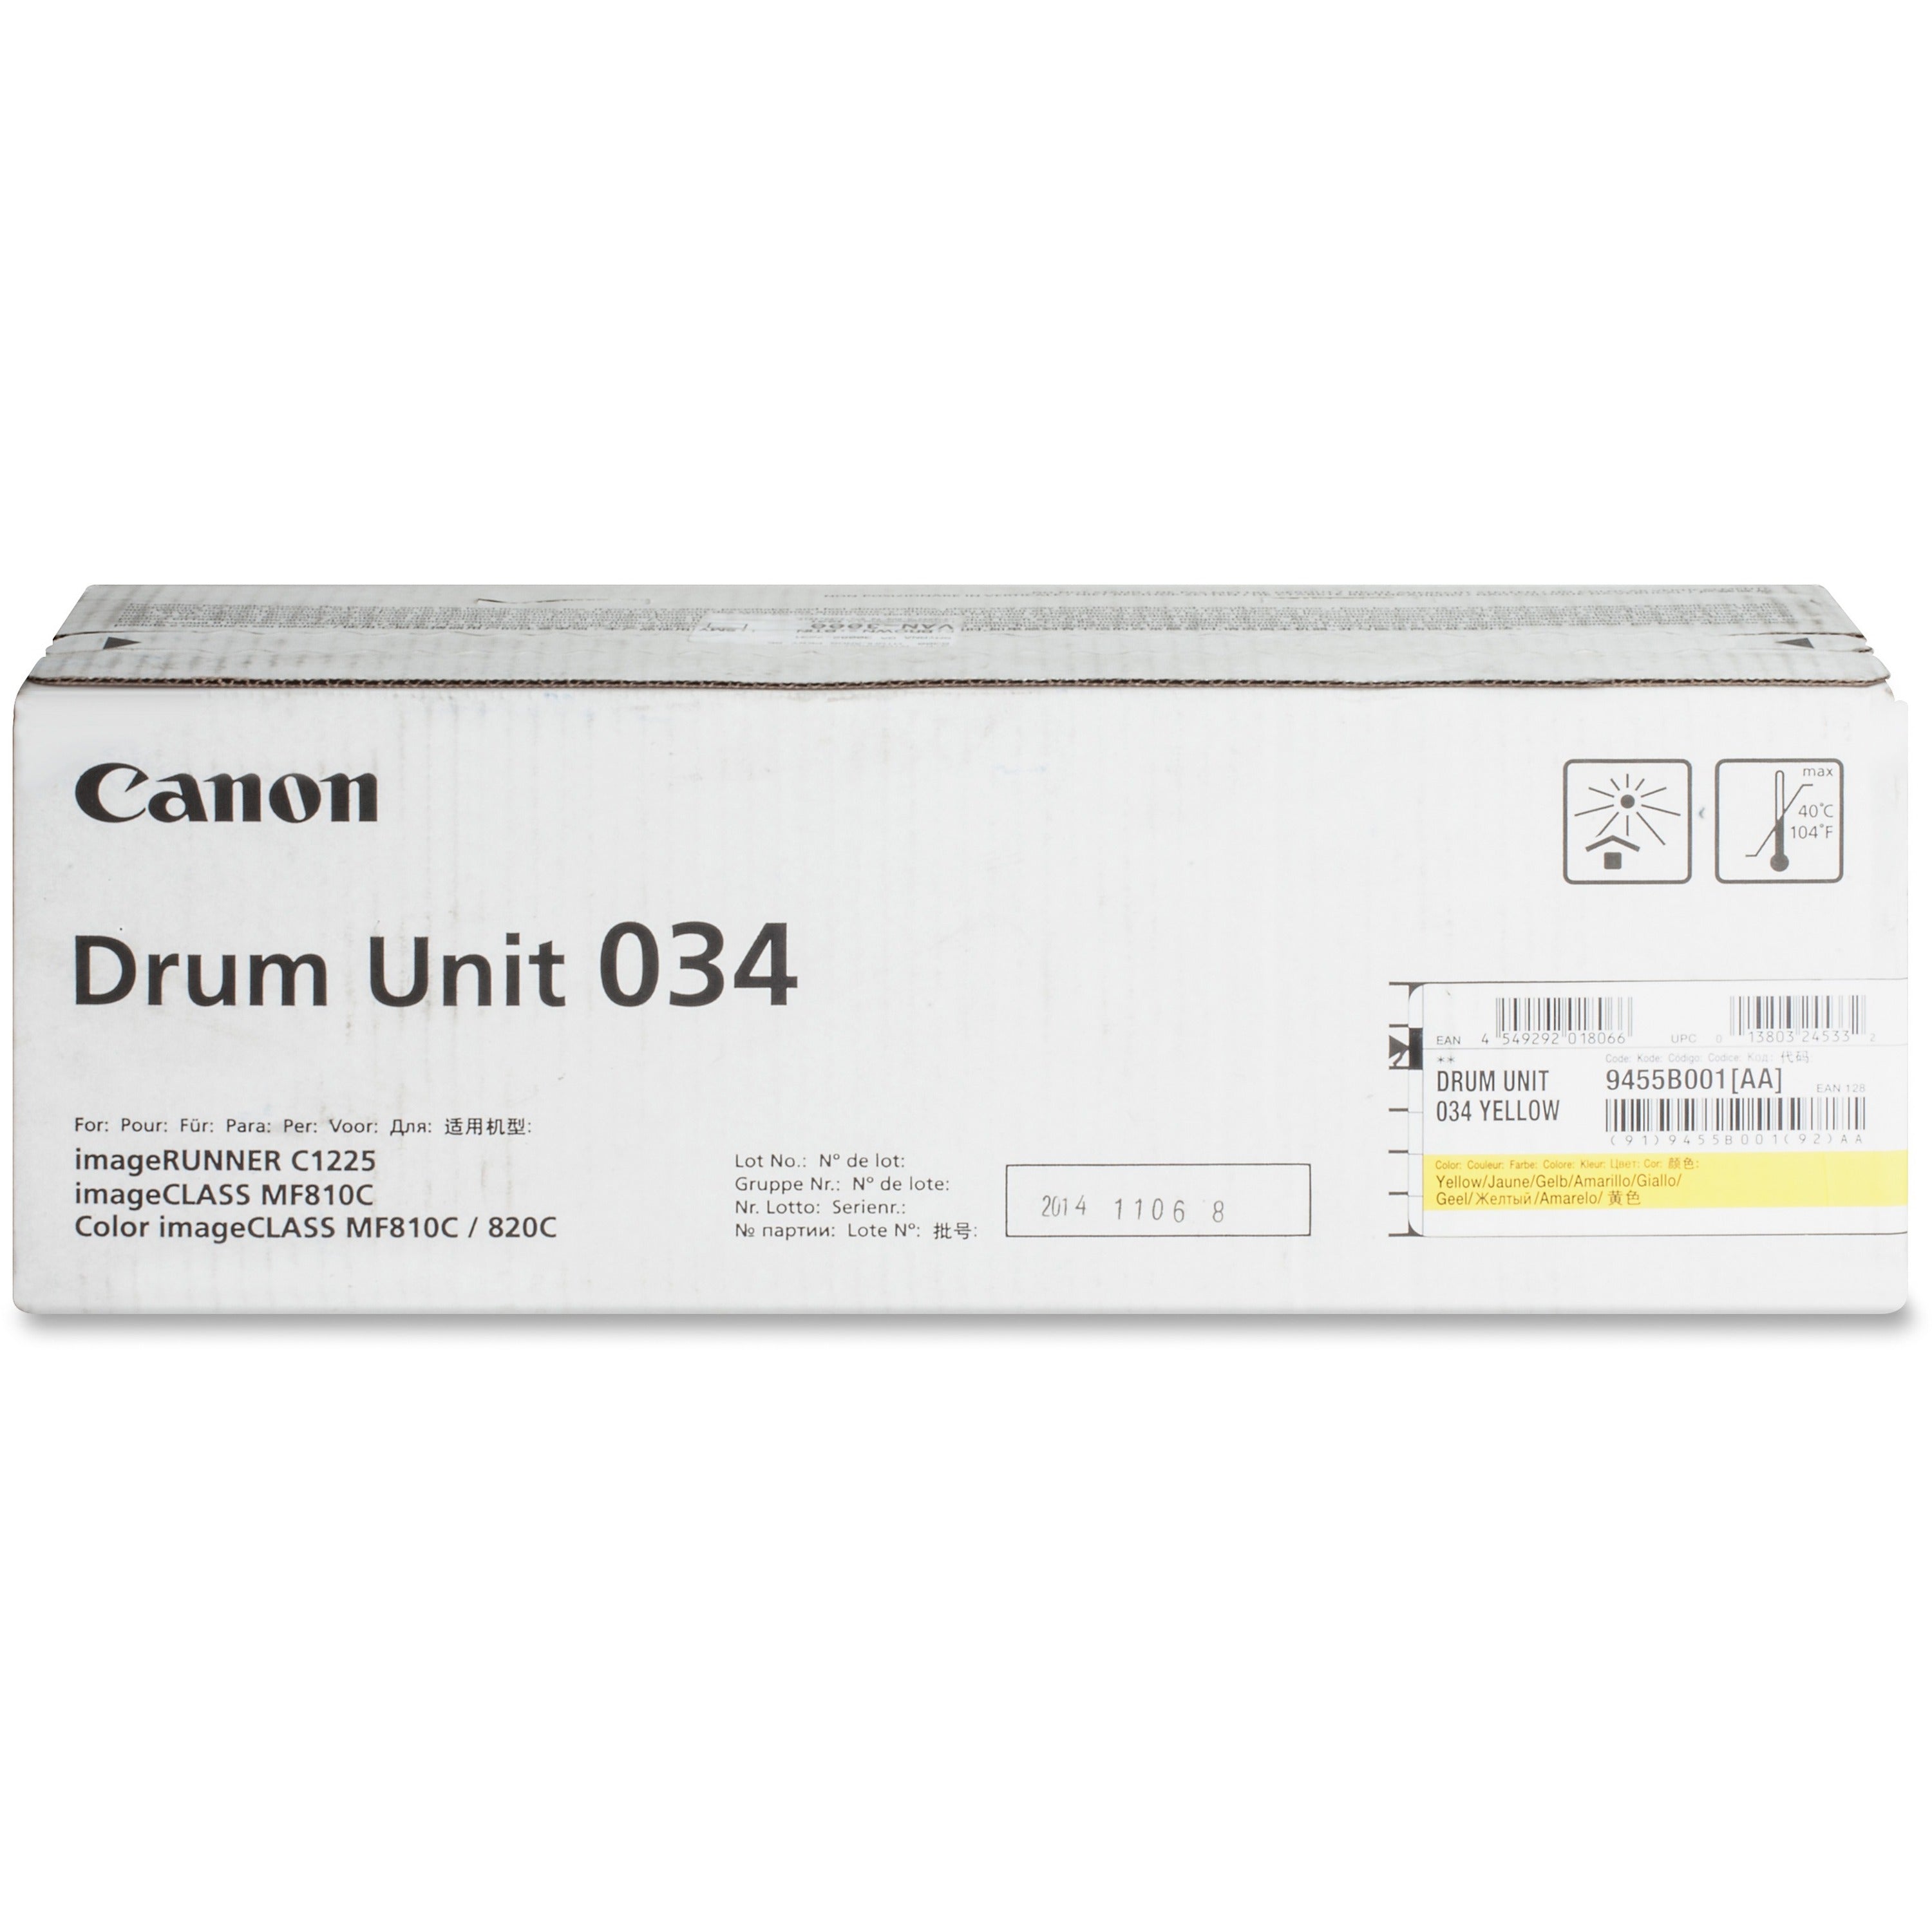 canon-drum034-drum-unit-laser-print-technology-35000-pages-1-each-yellow_cnmdrum034y - 1